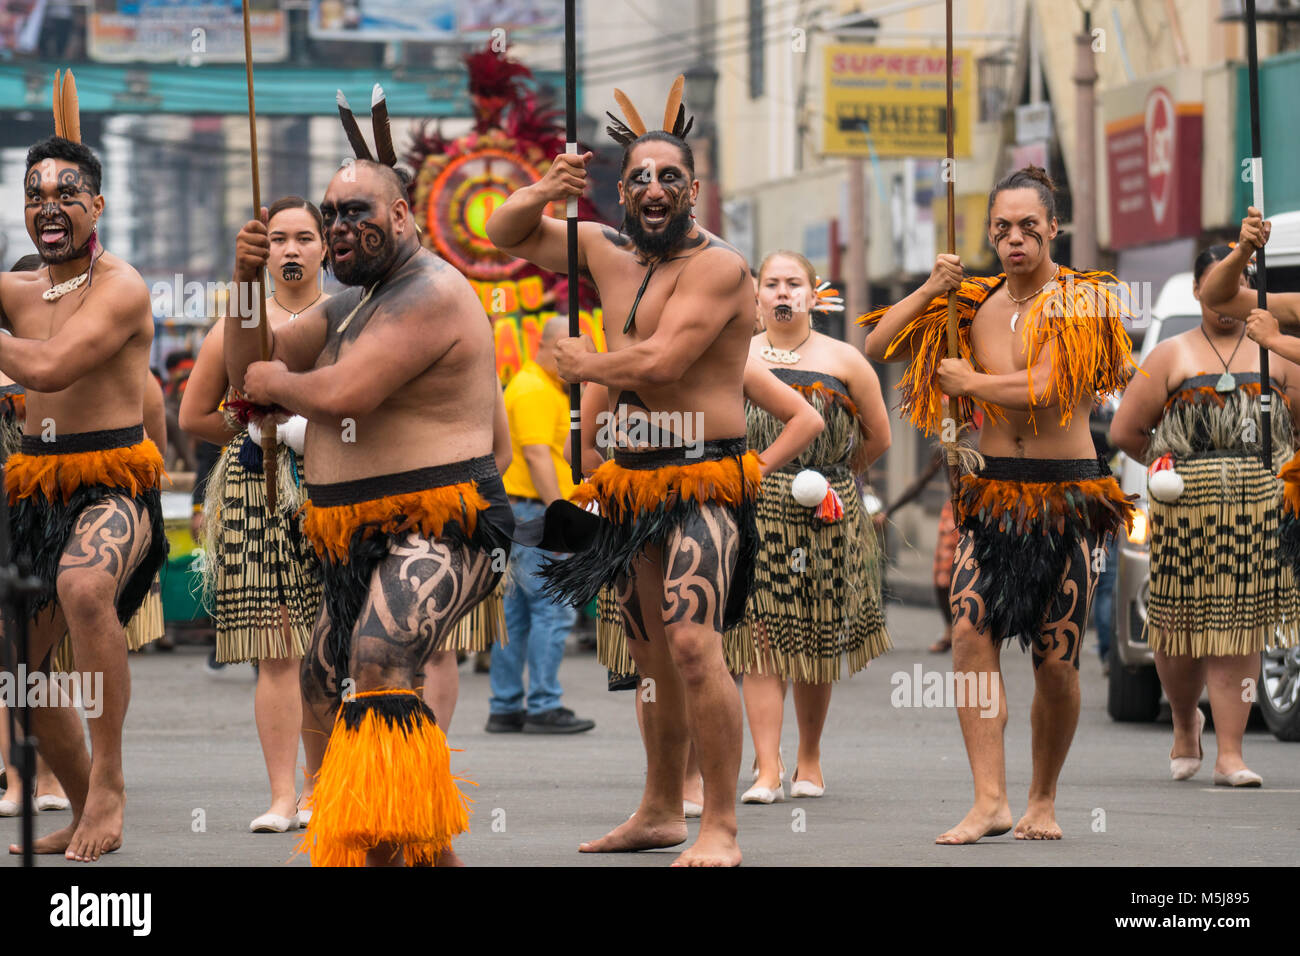 Kasadyahan is part of the Dinagyang Festival held annually in Iloilo,Philippines.This particular event celebrates the cultural aspects of the region.H Stock Photo